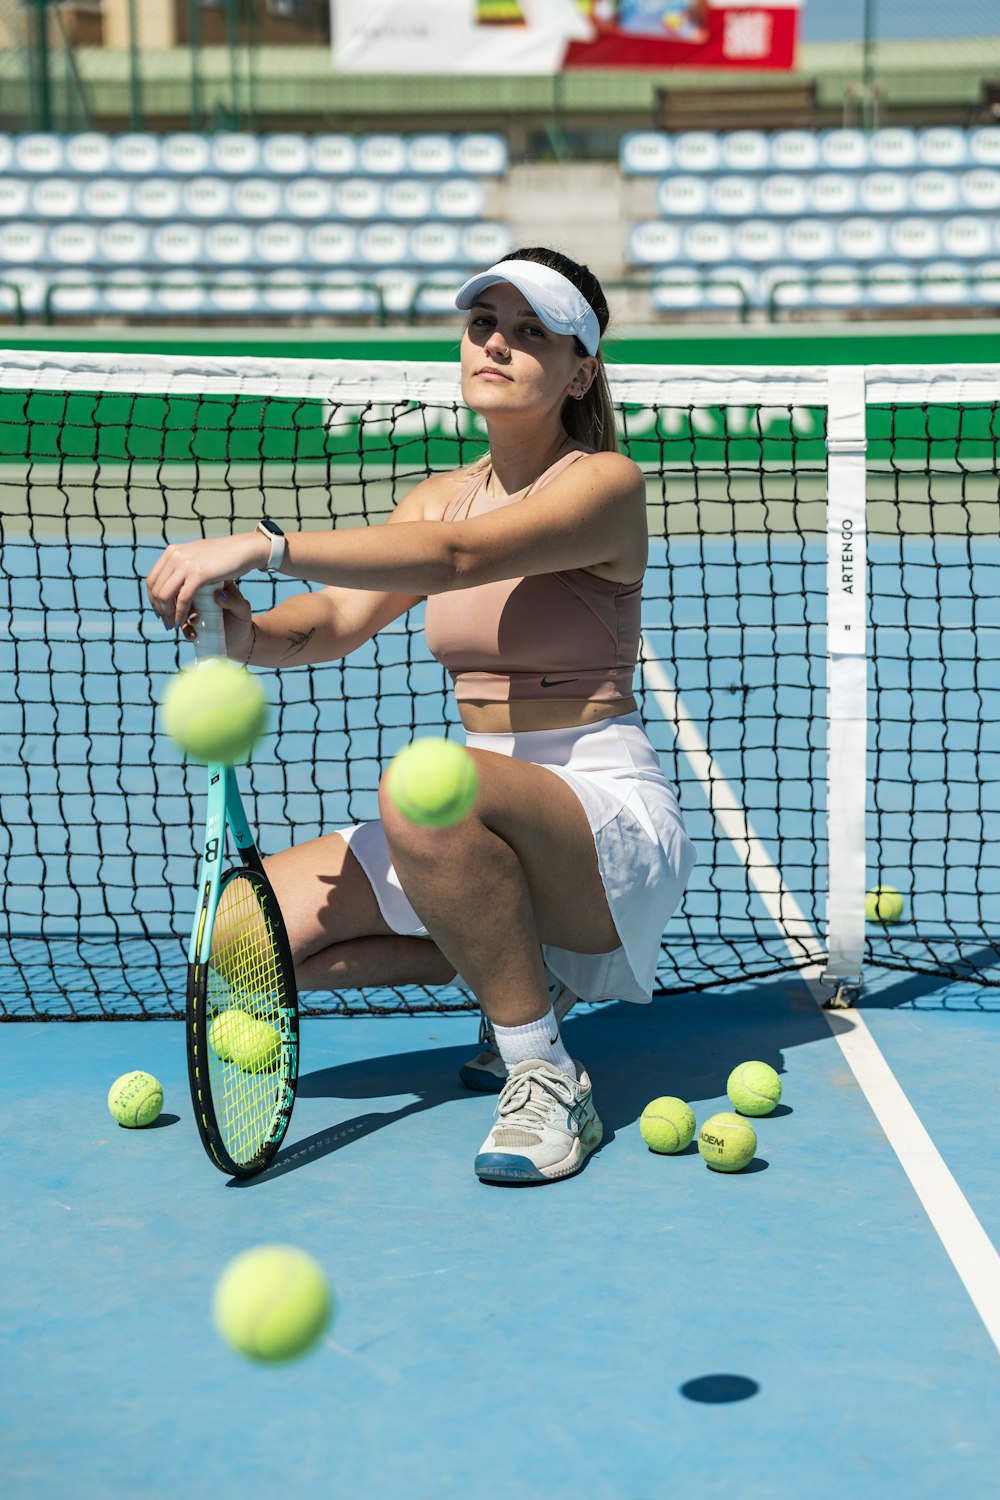 a woman is playing tennis on a tennis court